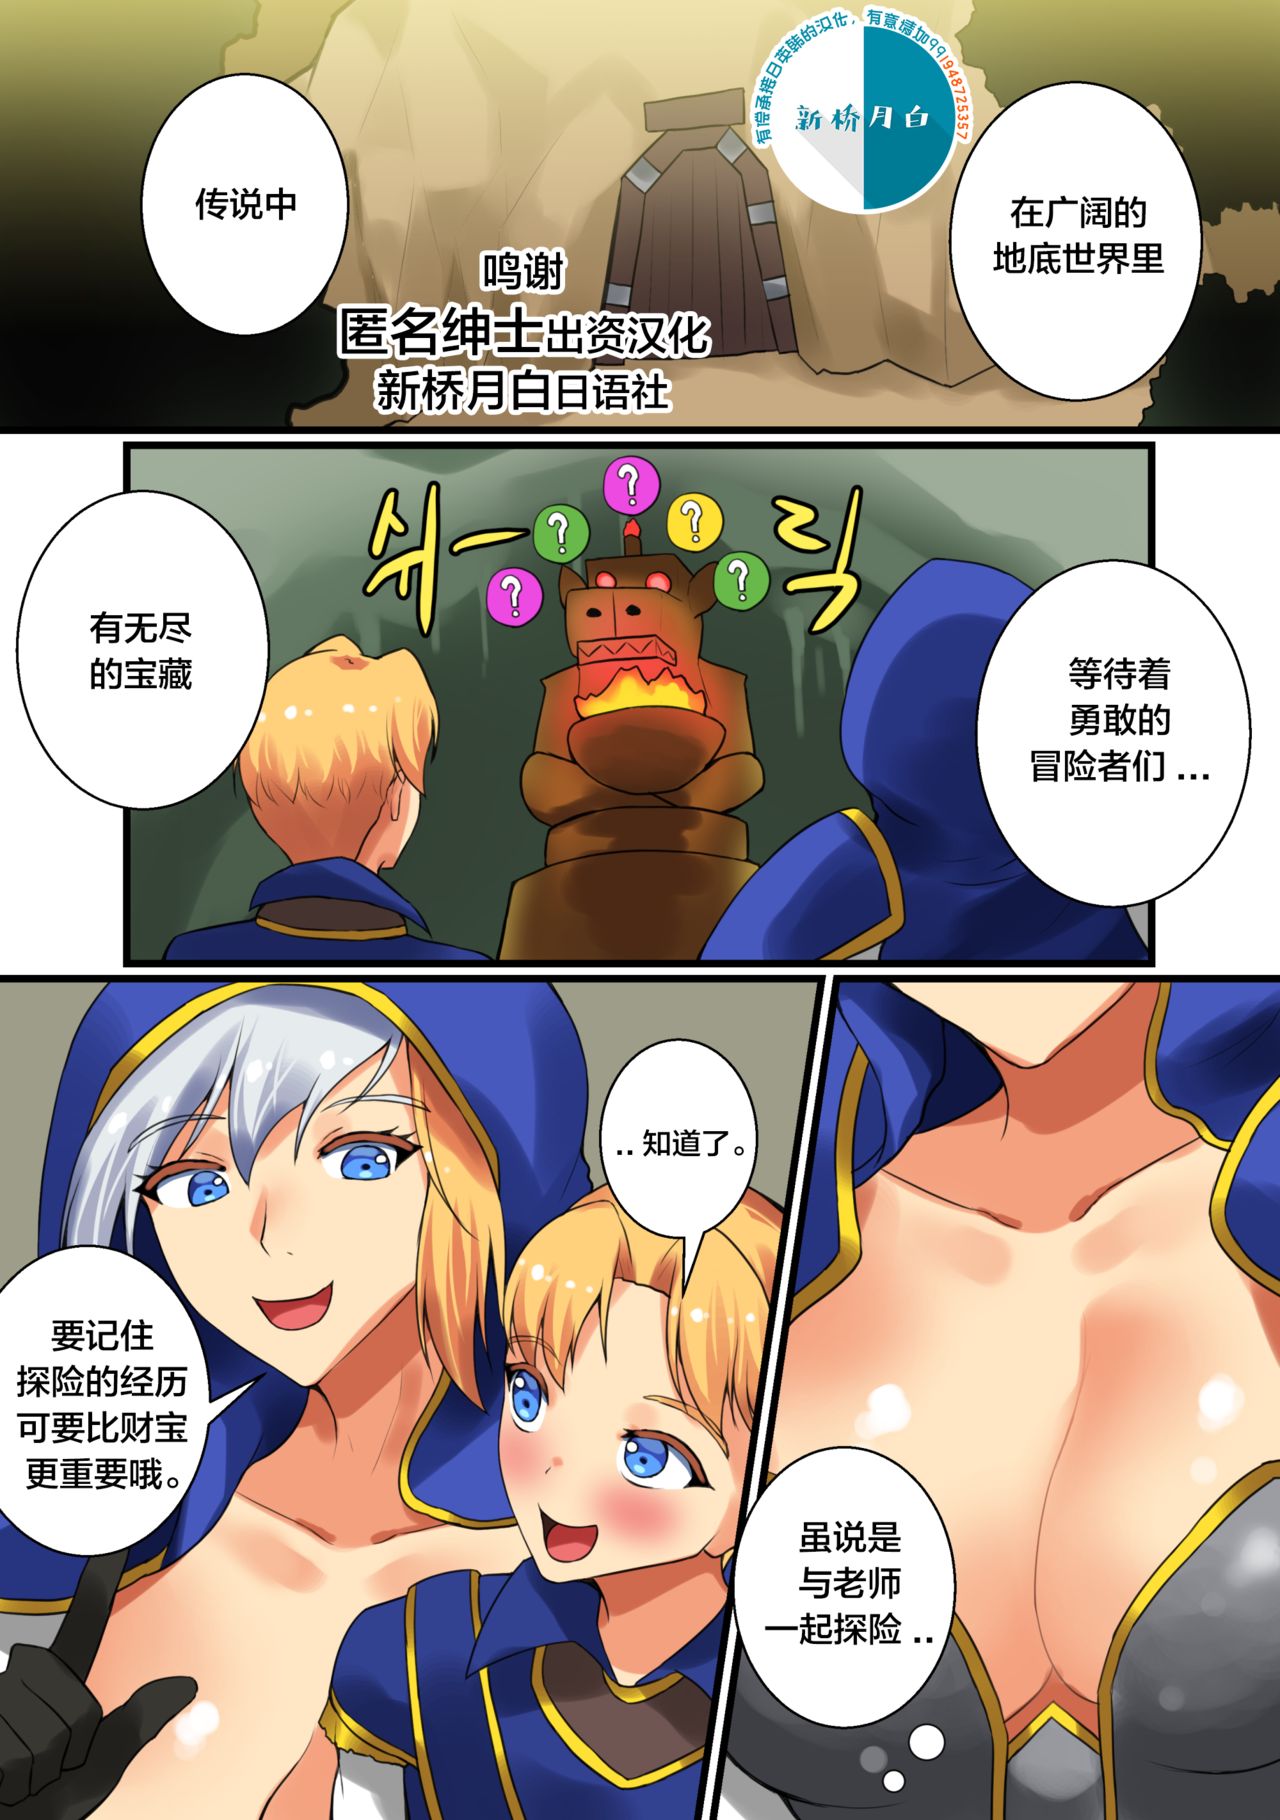 [hsd] With Teacher Jaina? 07 (World of Warcraft) [Chinese] [新桥月白日语社] page 1 full